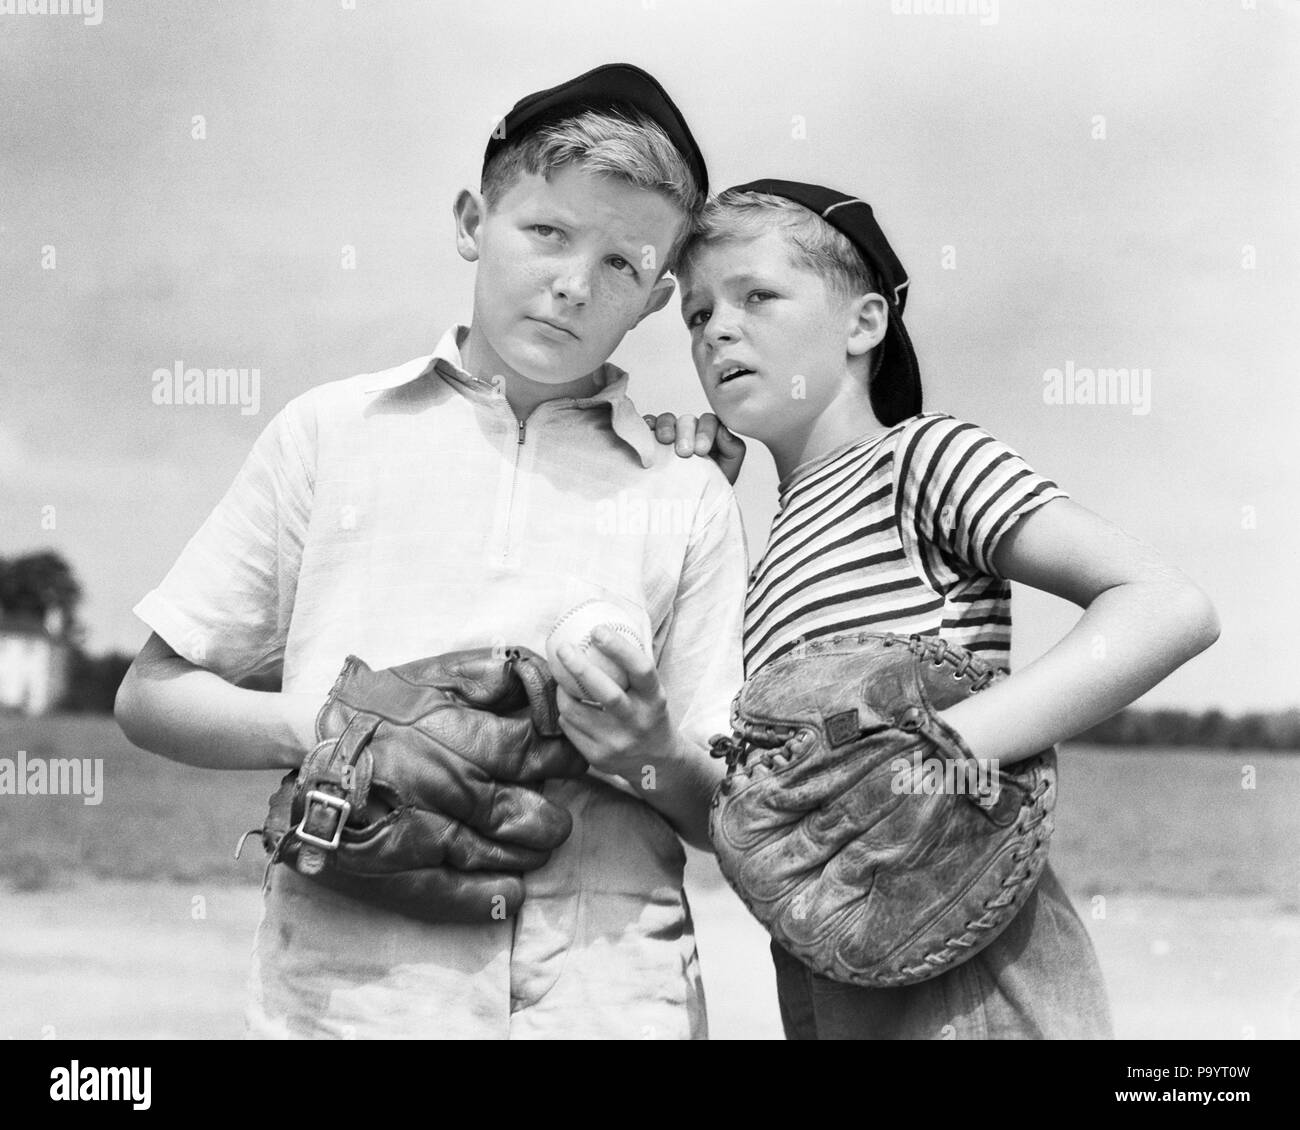 1930s TWO BOYS WEARING BASEBALL CAPS AND GLOVES CATCHER AND PITCHER PLANNING STRATEGY WHISPERING - b1990 HAR001 HARS HEALTHINESS COPY SPACE HALF-LENGTH MALES PLANNING SIBLINGS EXPRESSIONS B&W SUMMERTIME GOALS PITCHER HAPPINESS STRATEGY CATCHER MITT AND RECREATION MITTS SIBLING CONNECTION CAPS BALL GAME BALL SPORT COOPERATION JUVENILES BLACK AND WHITE CAUCASIAN ETHNICITY HAR001 OLD FASHIONED Stock Photo